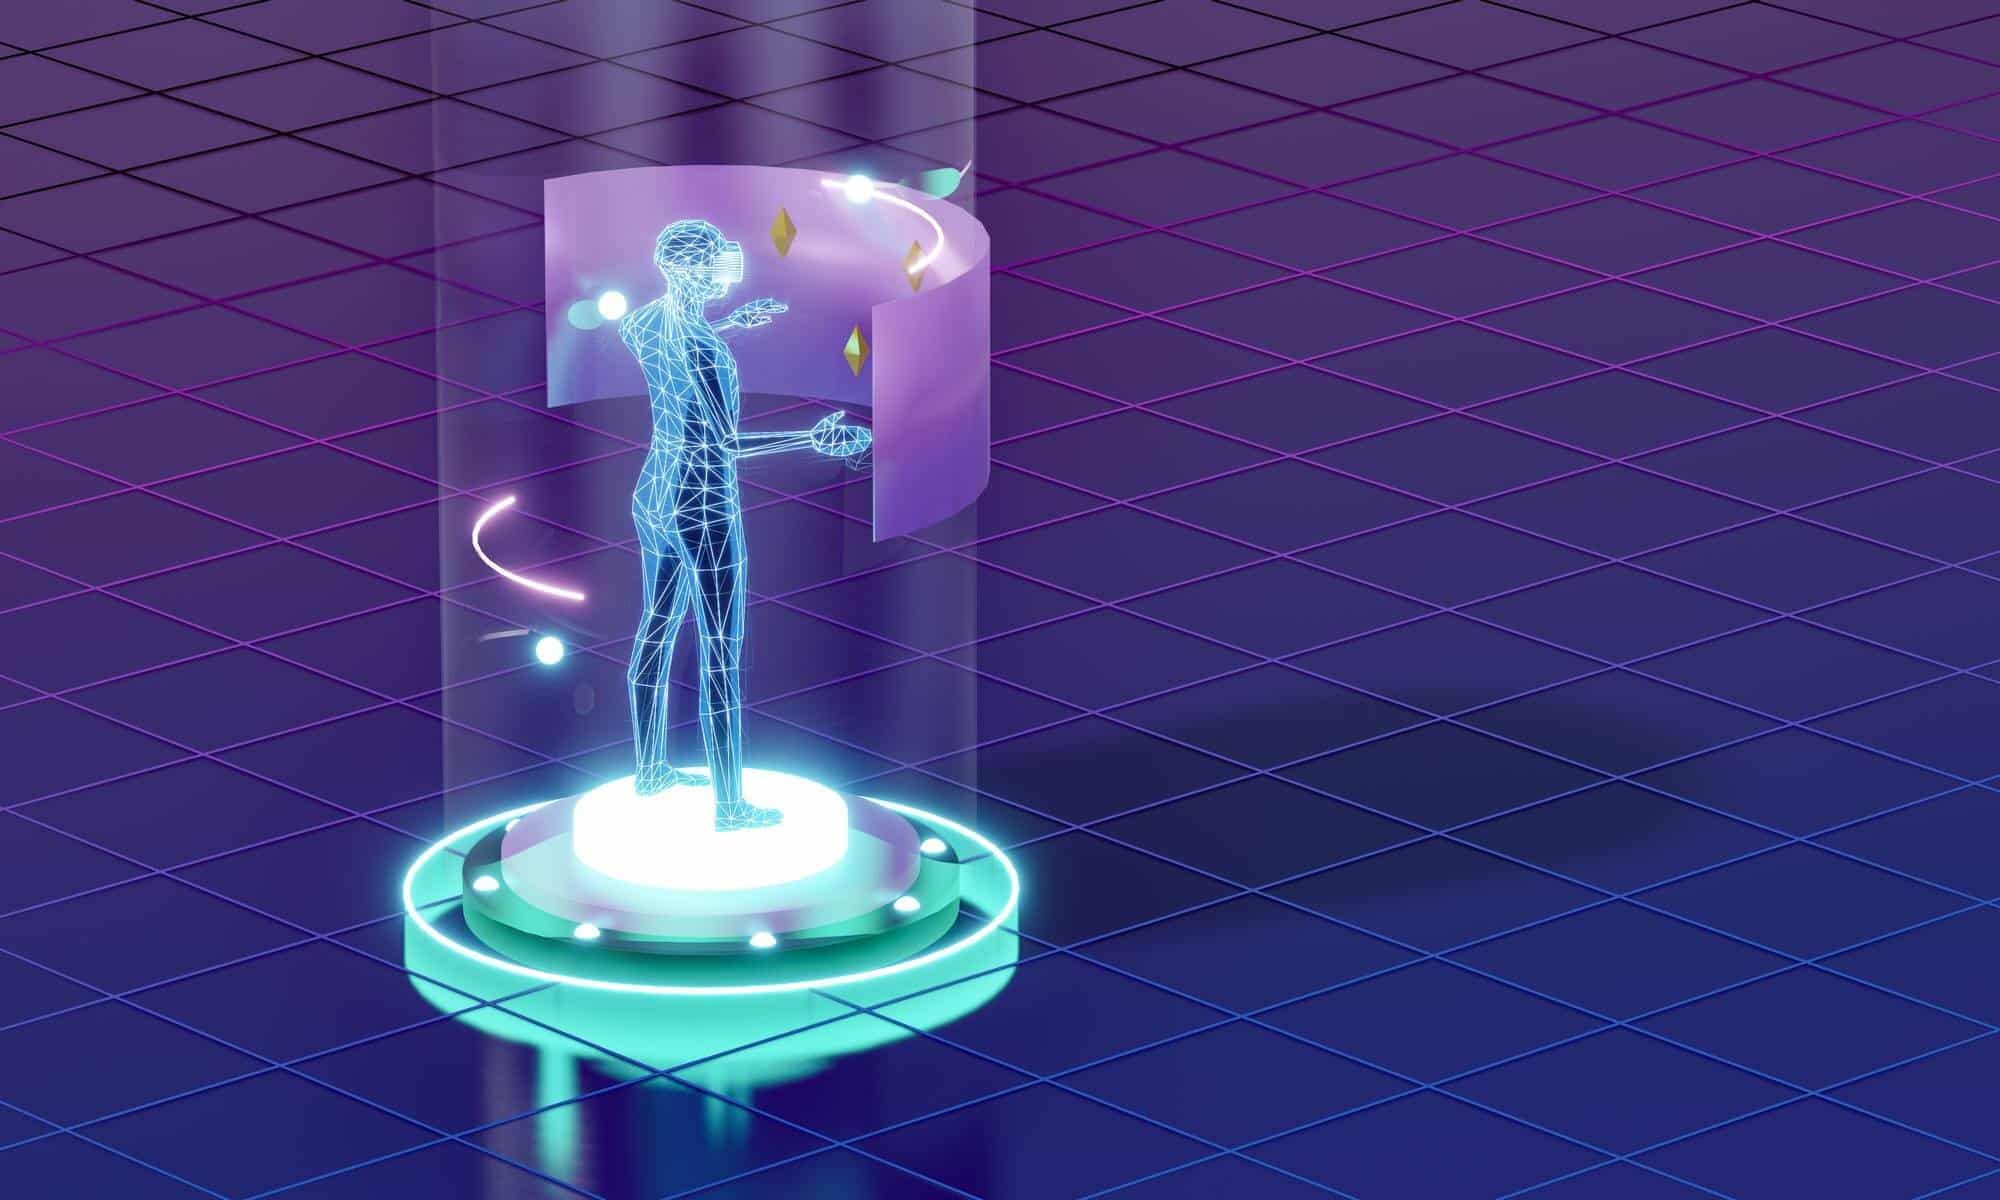 Tech To You Later 3D Hologram Projector – Tech To Ya Later